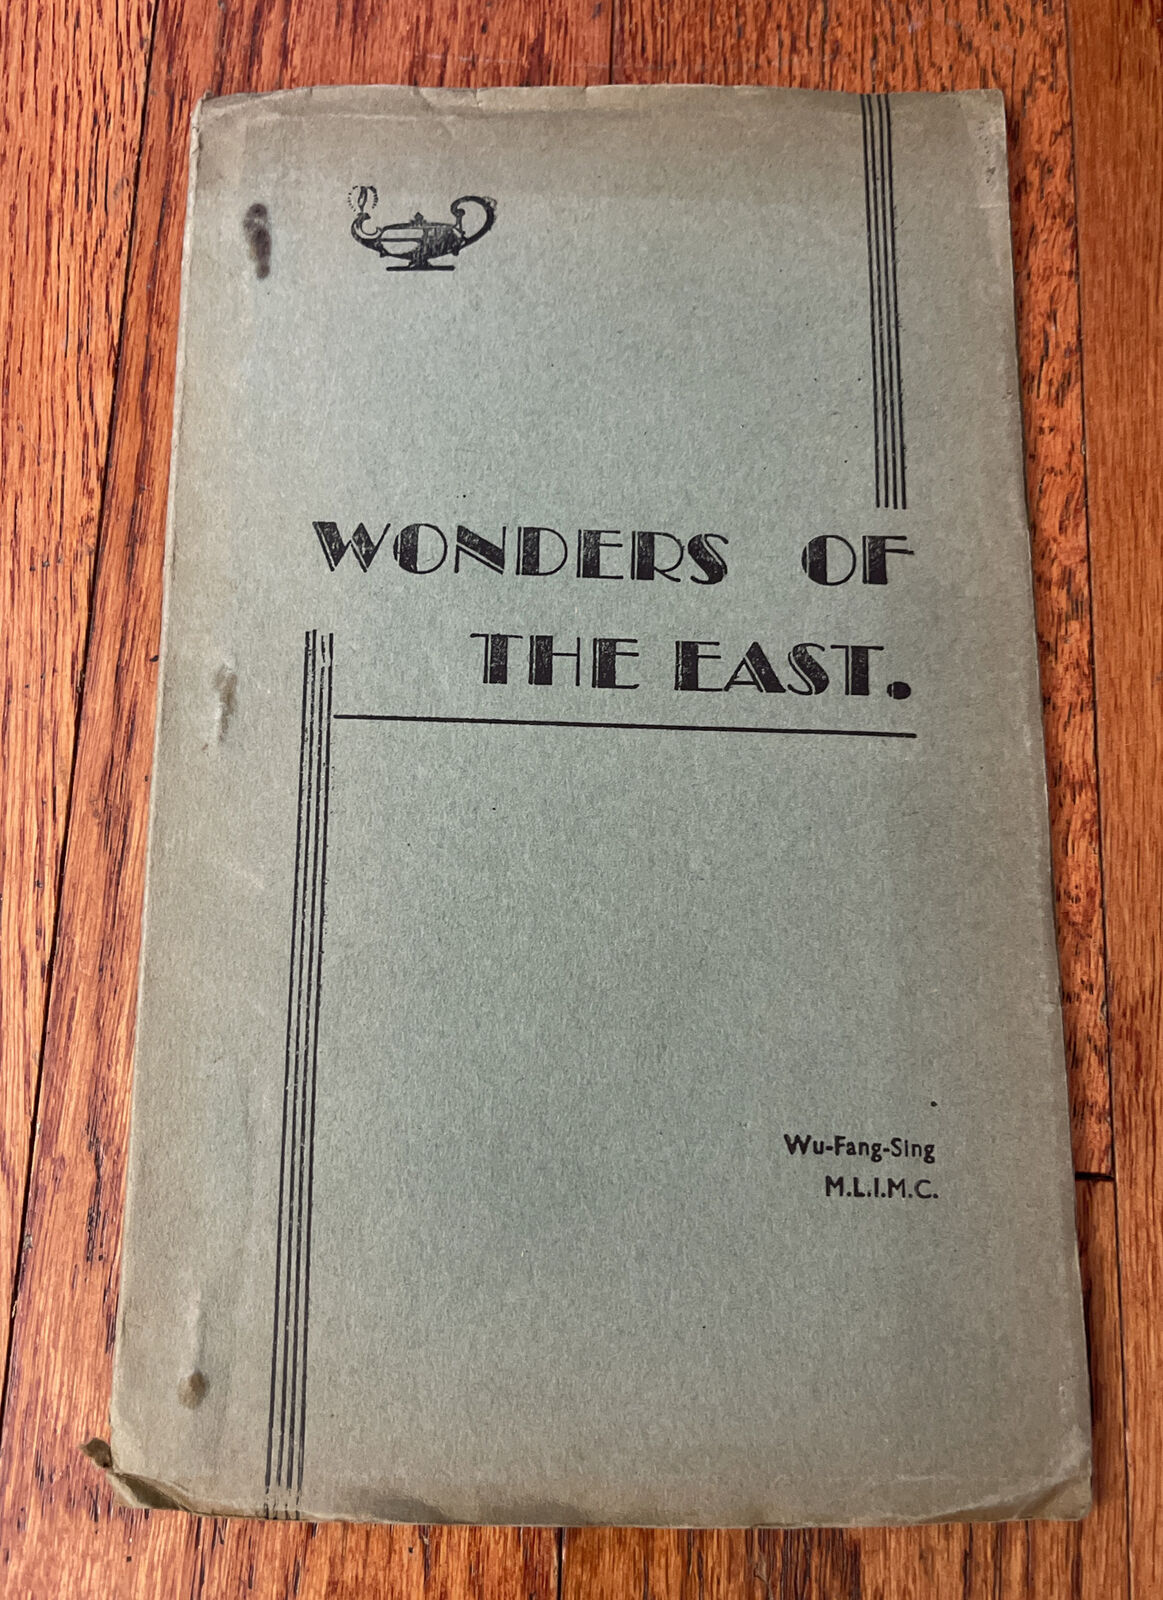 1938 Wonders of the East by Wu Fang Sing Paperback Book Magic RARE